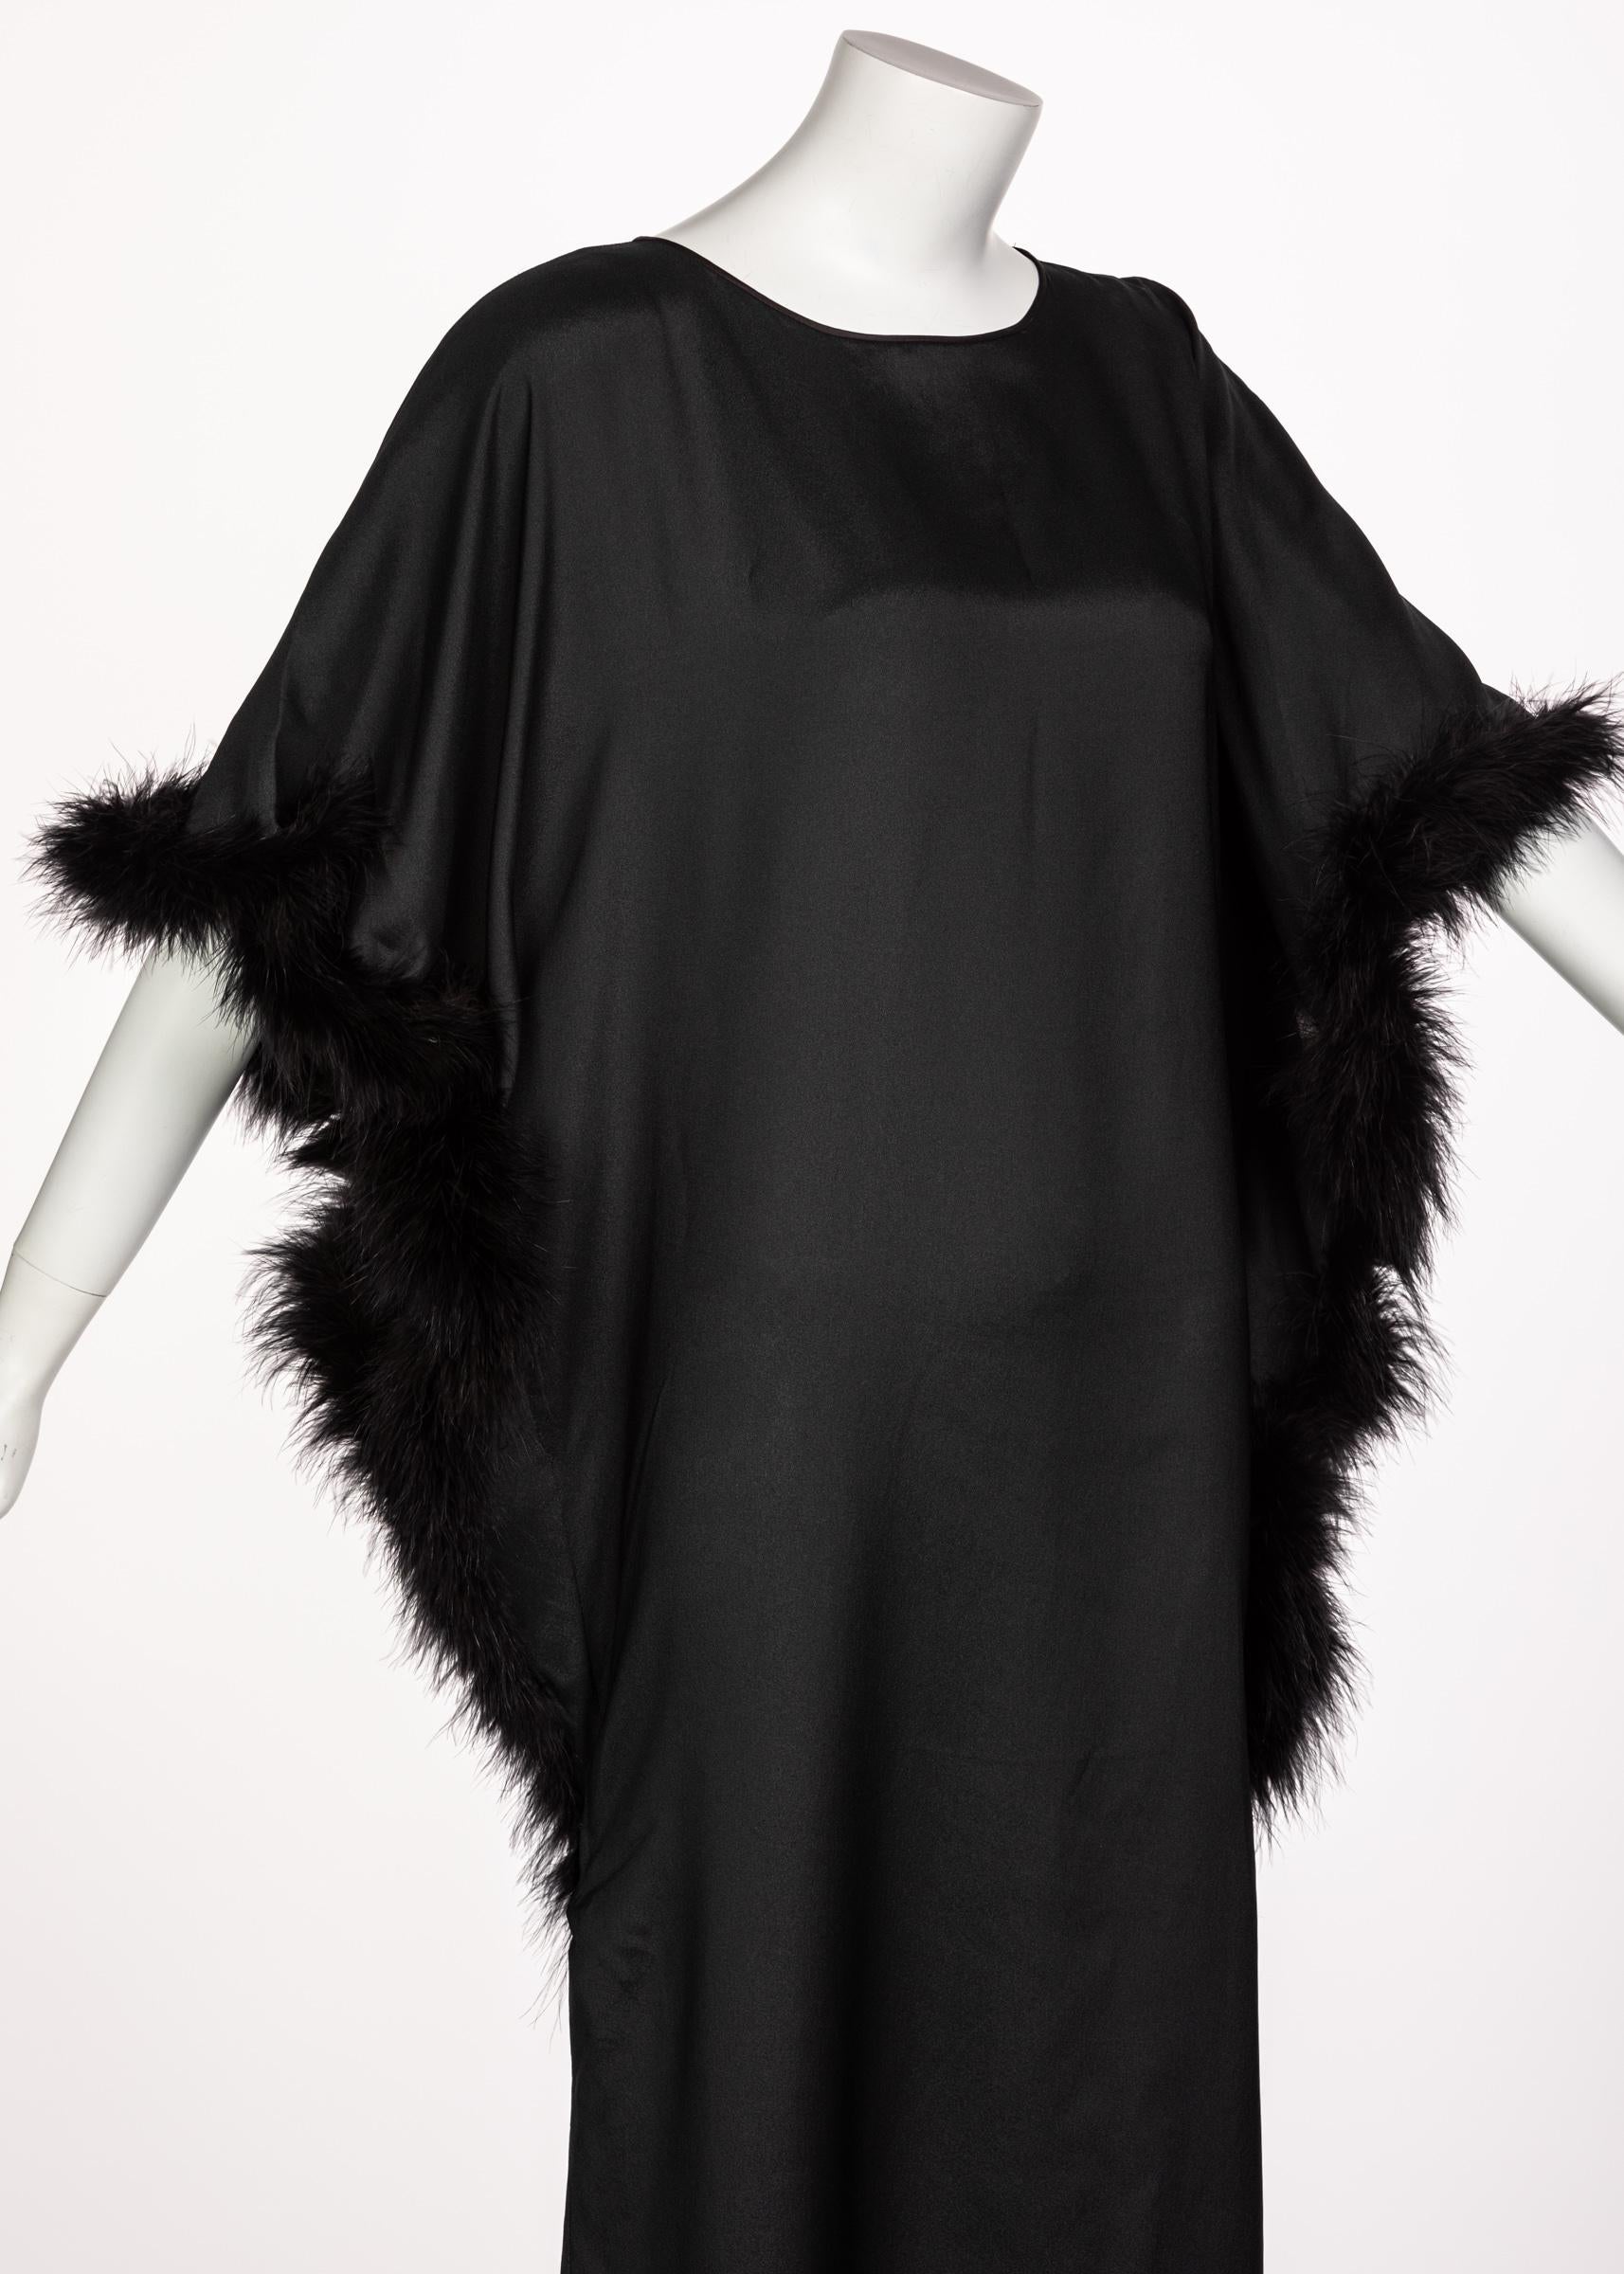 Lucie Anne Black Feather Caftan, 1970s 1